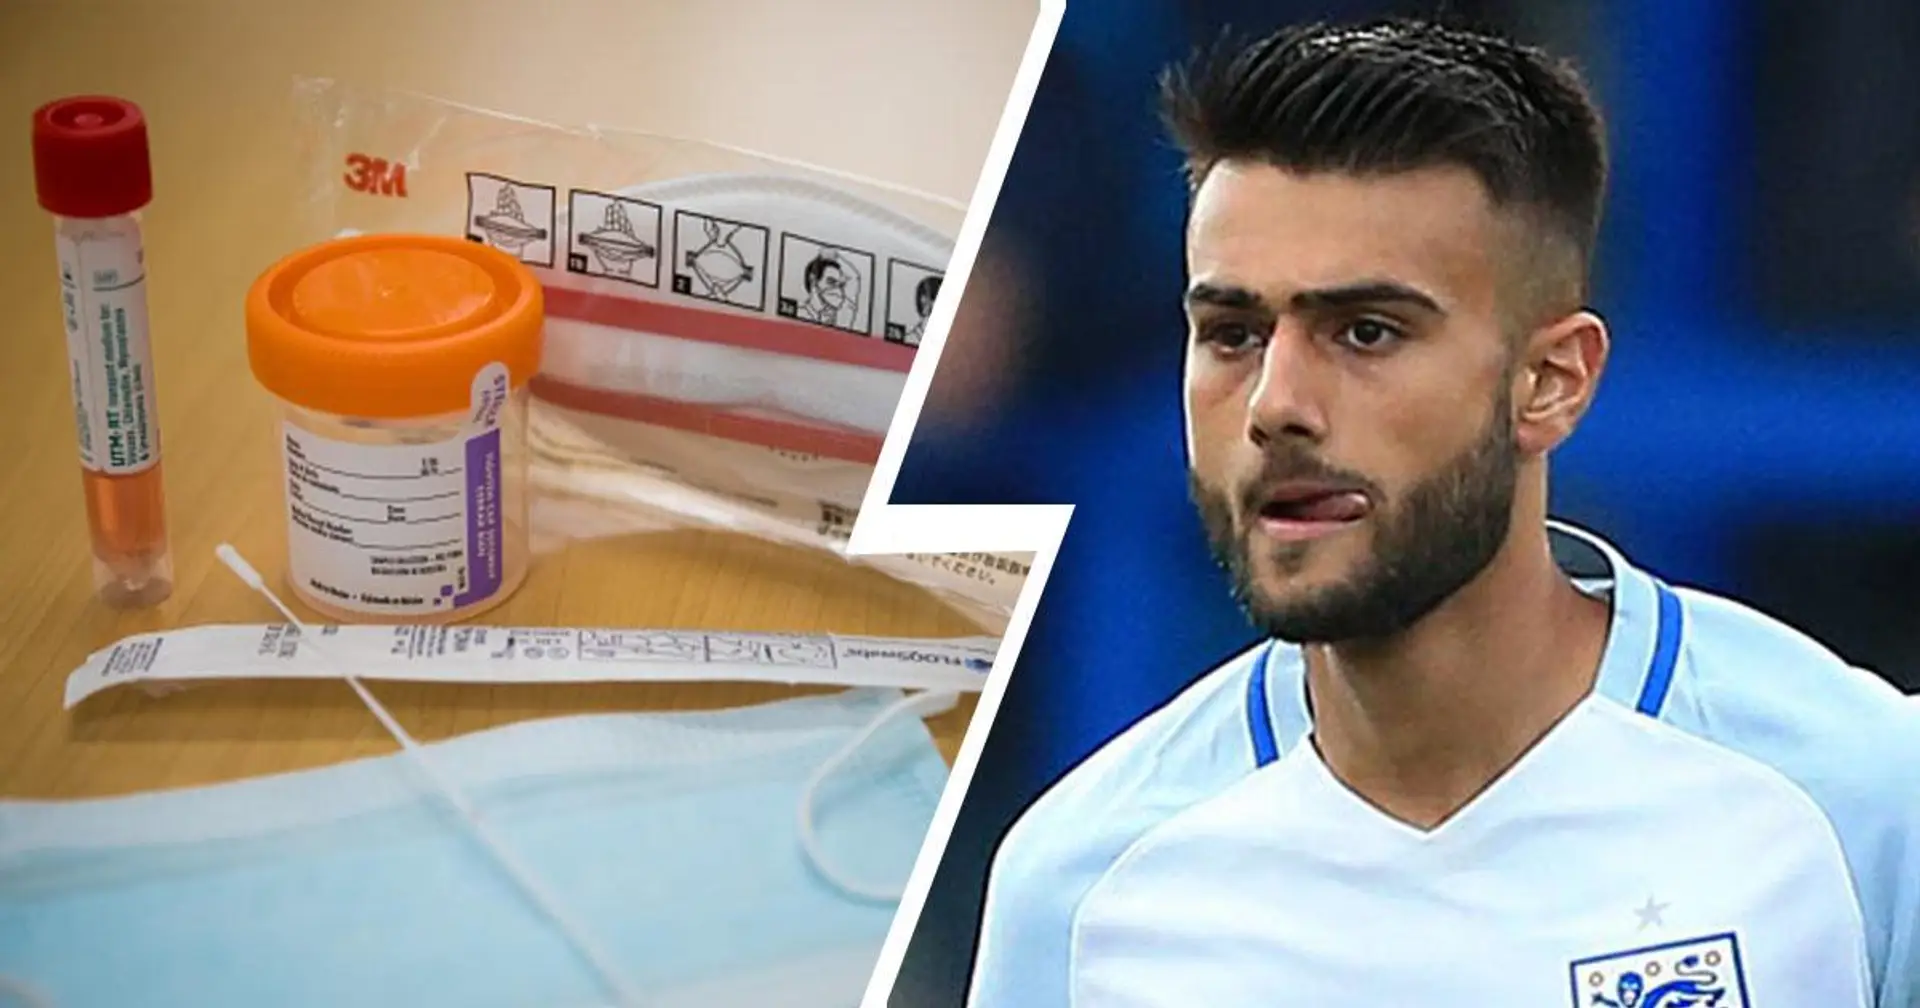 What it's like for footballer to be tested for coronavirus: Former England U20 star reveals 'nerve-wracking' procedure